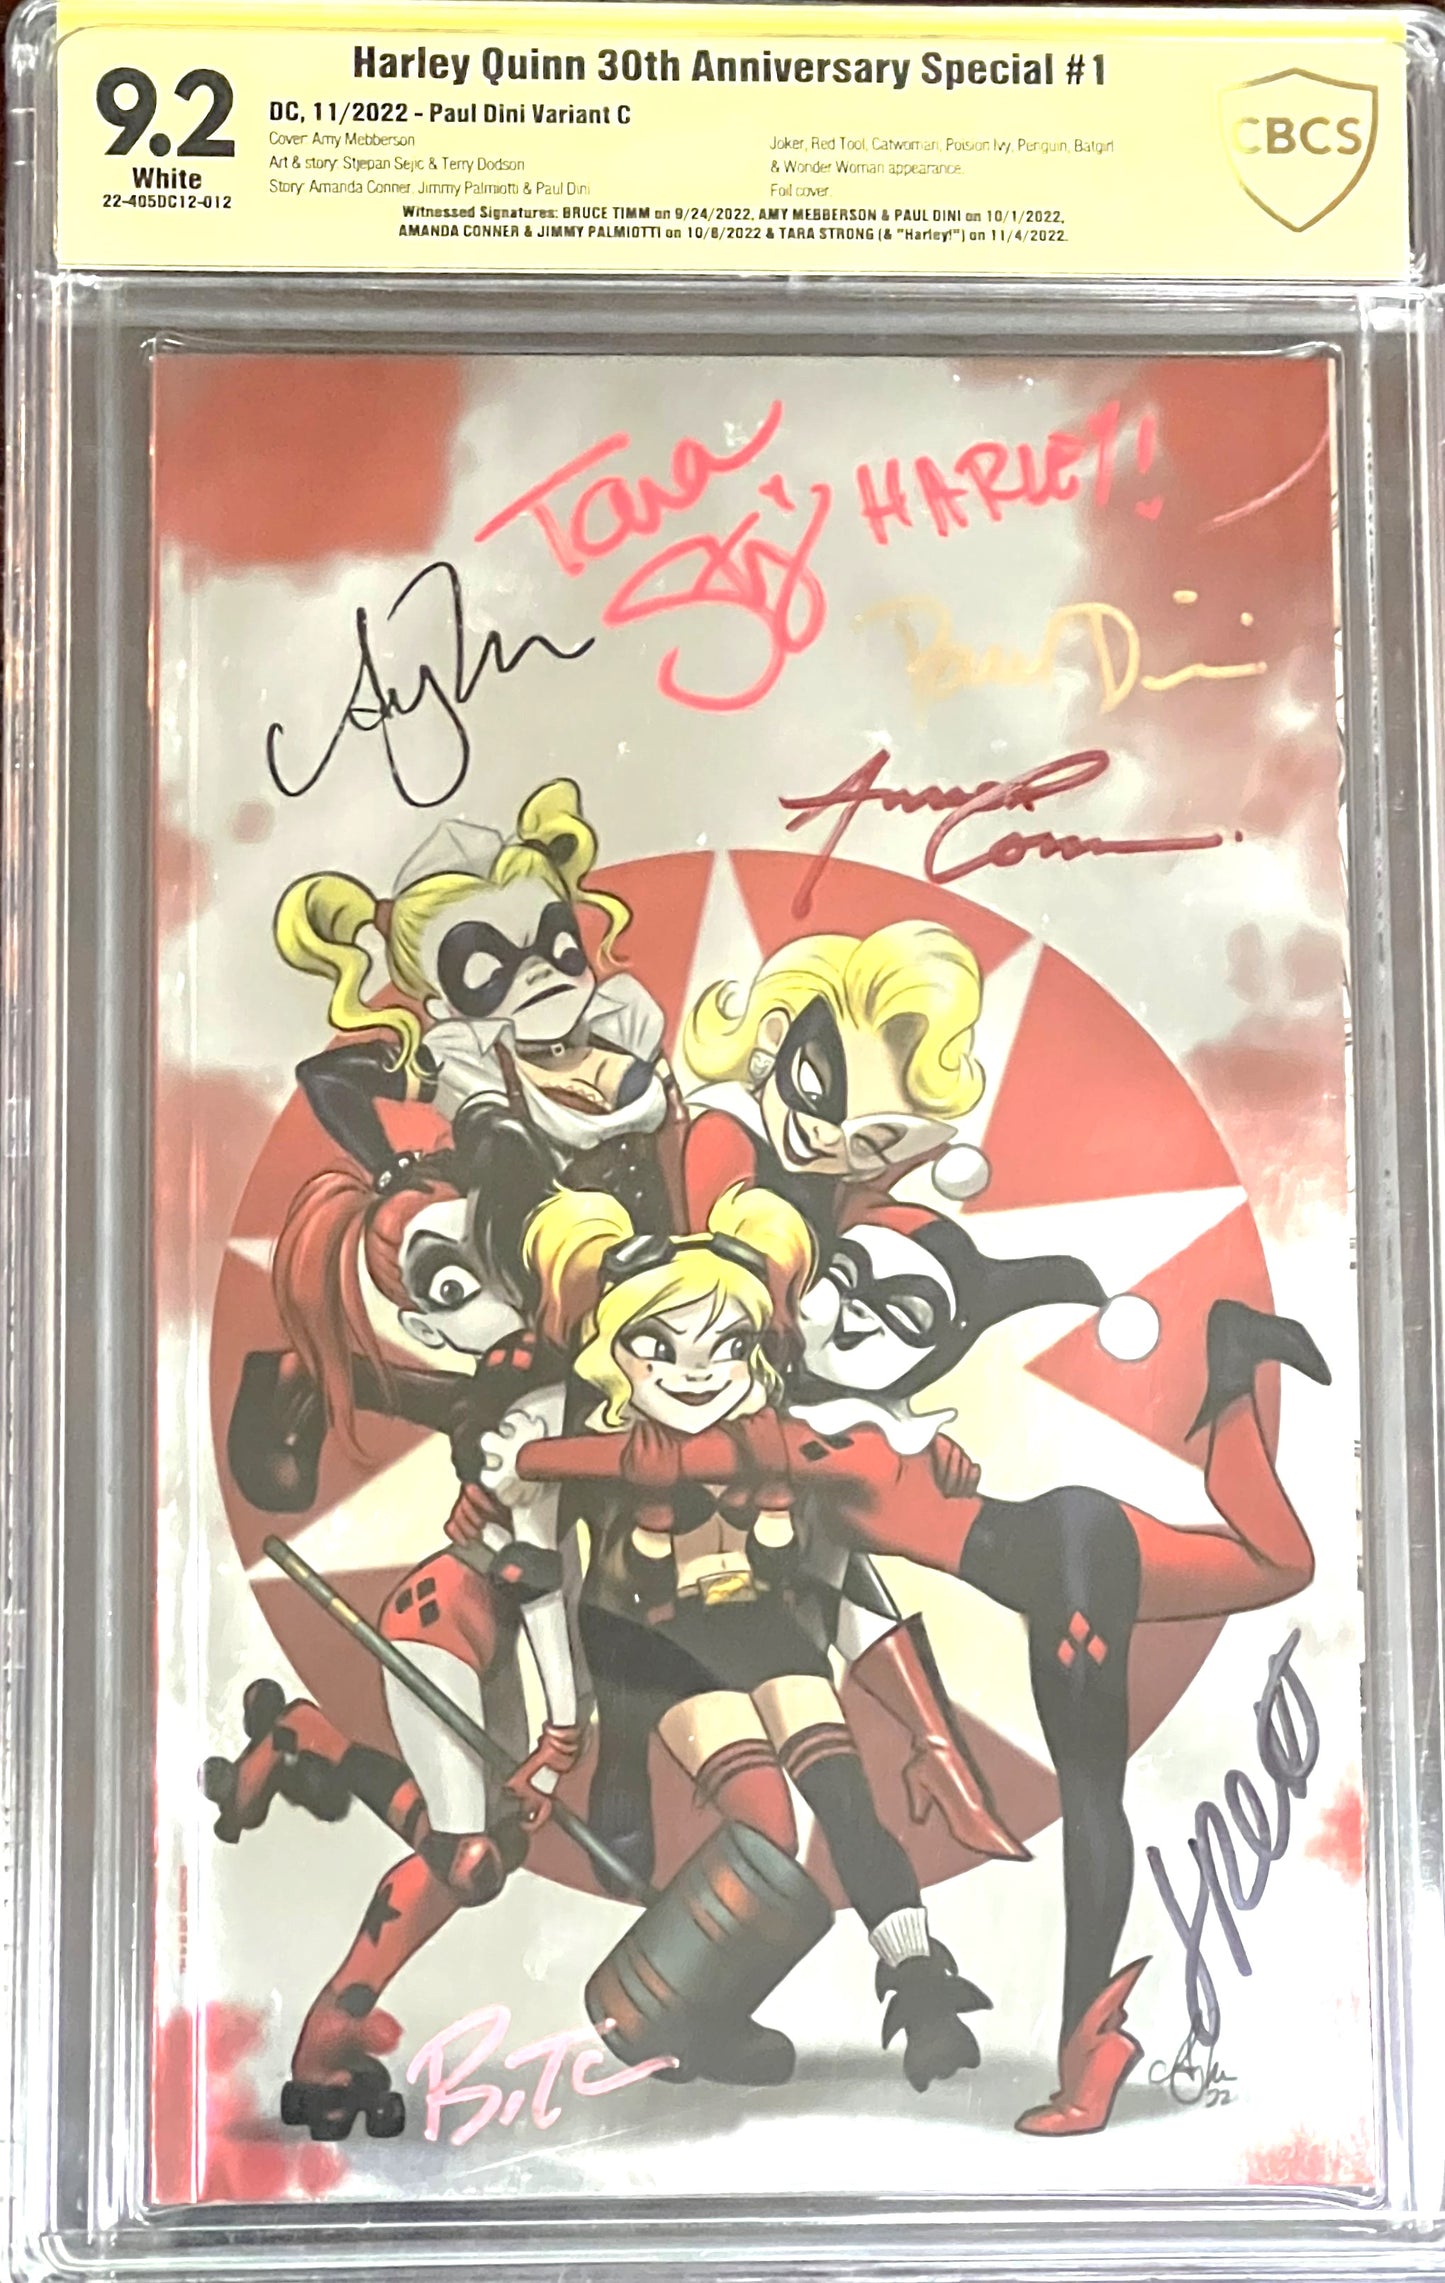 Harley Quinn 30th Anniversary Special #1. Paul Dini Variant. Foil Cover. CBCS 9.2. Multi-signed.